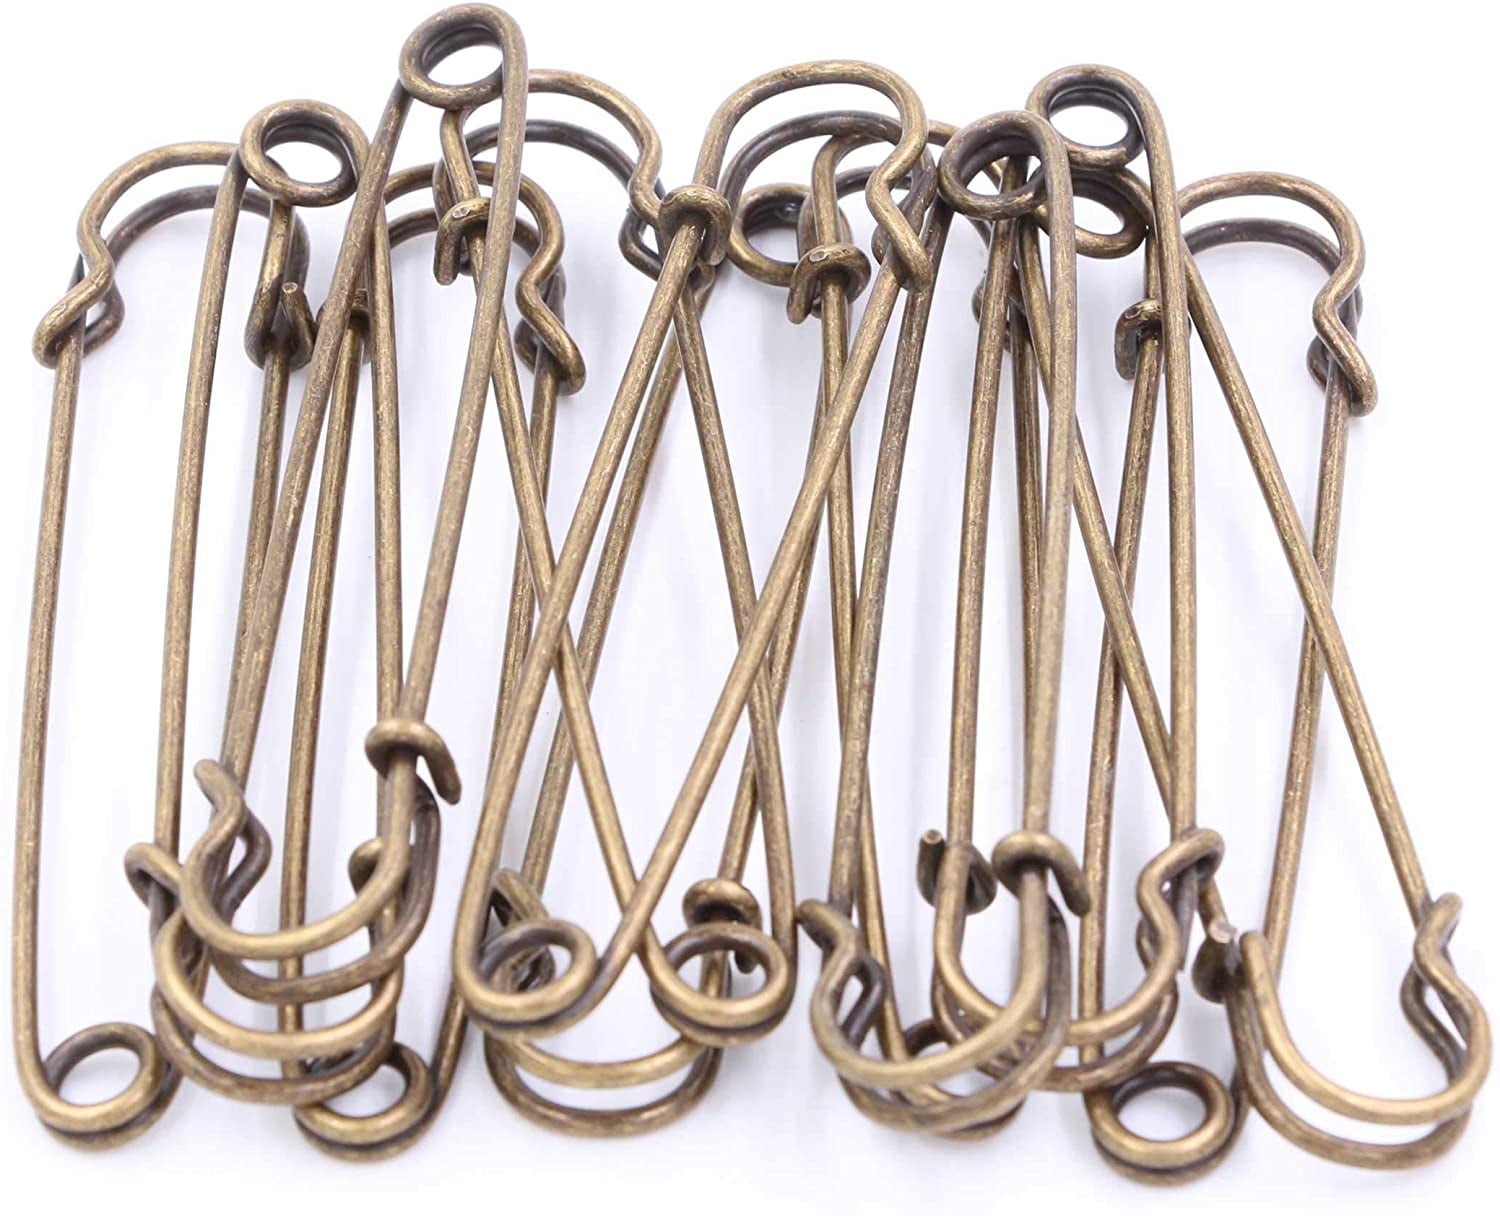 Large Safety Pins, Large Safety Pins Heavy Duty, Safety Pins for Clothes,  Blanket Safety Pins, 12 Pack Pins Assorted for Clothes, Leather, Crafts,  Canvas, Blank…